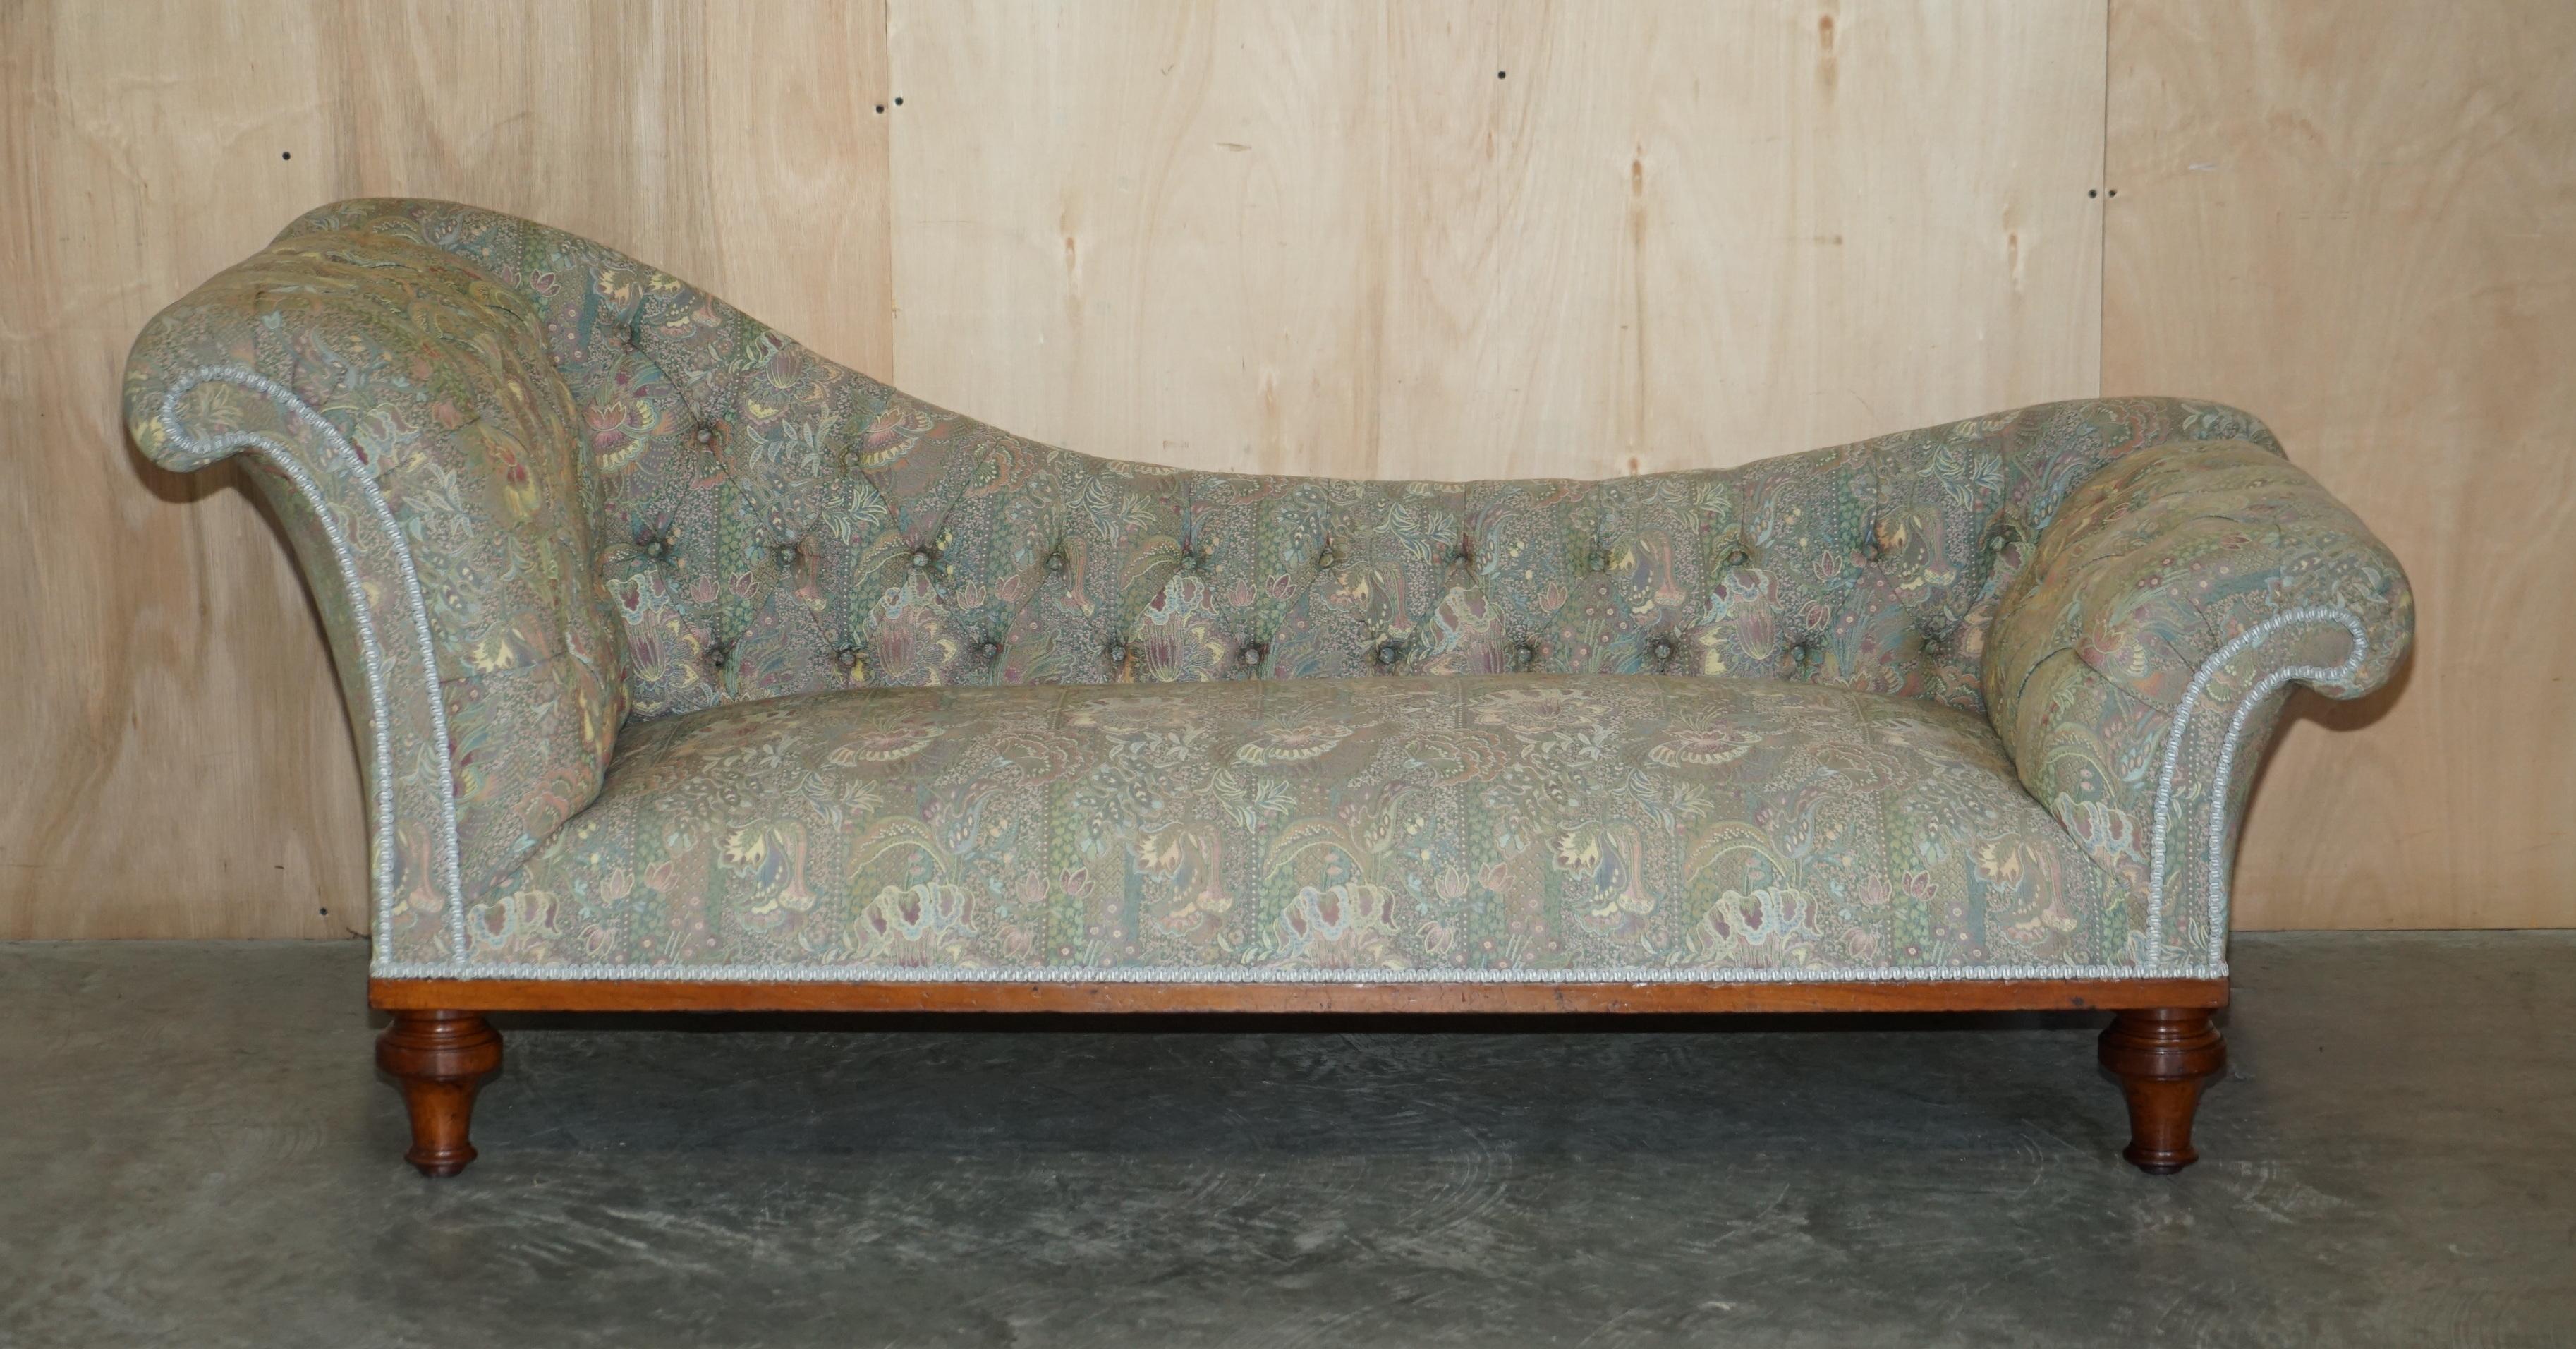 We are delighted to offer for sale this exquisite circa 1880 Liberty's of London upholstered Burl Walnut framed Chesterfield tufted Chaise Lounge

This Chaise Lounge is an absolute ten, the light burl walnut frame is exquisite, the upholstery is